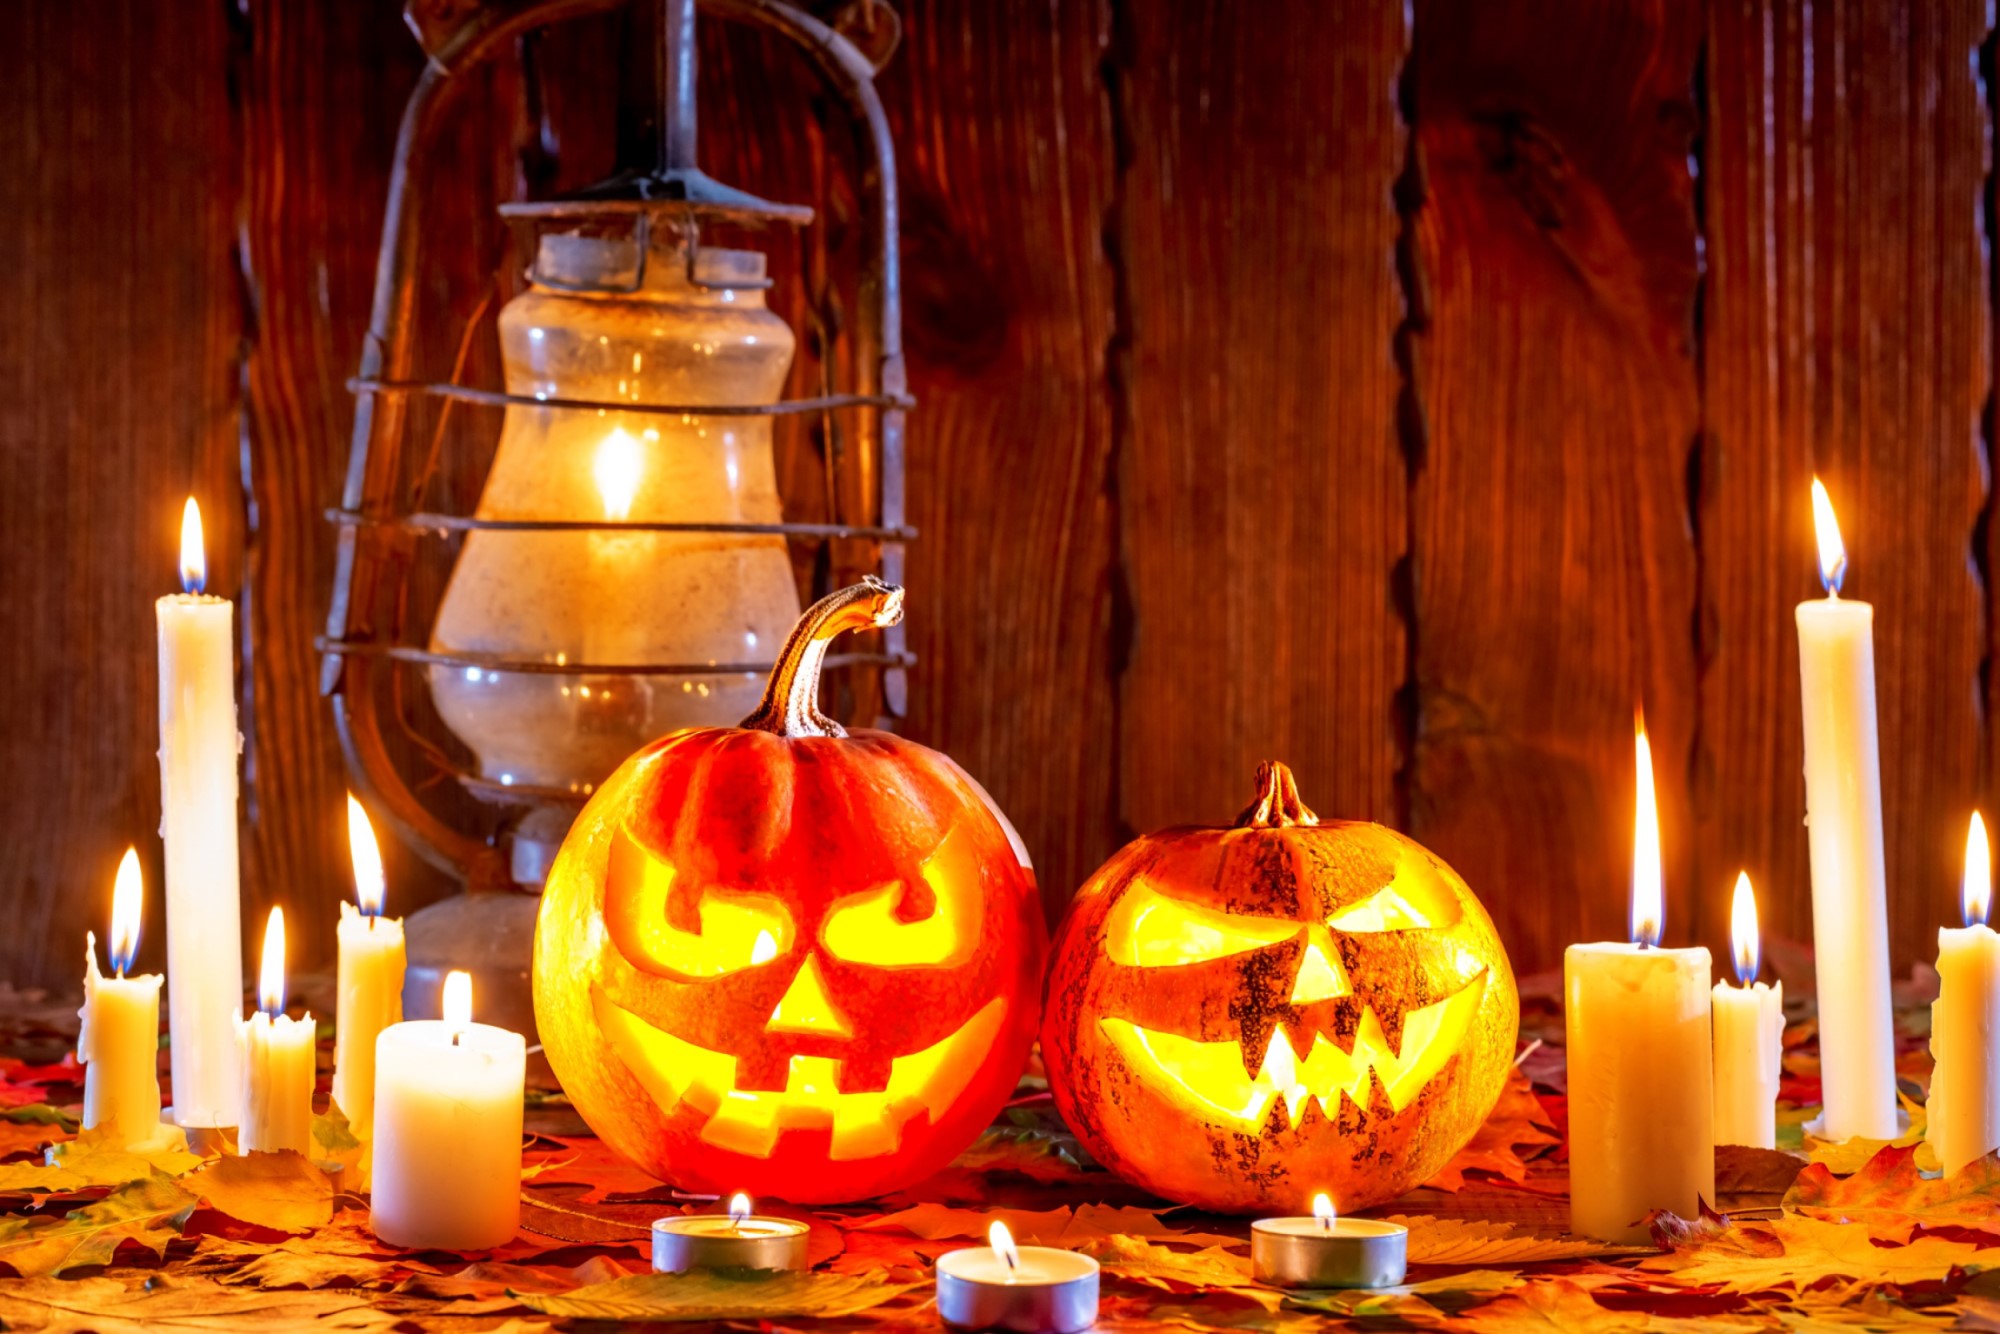 Halloween: interesting history and traditions of the holiday